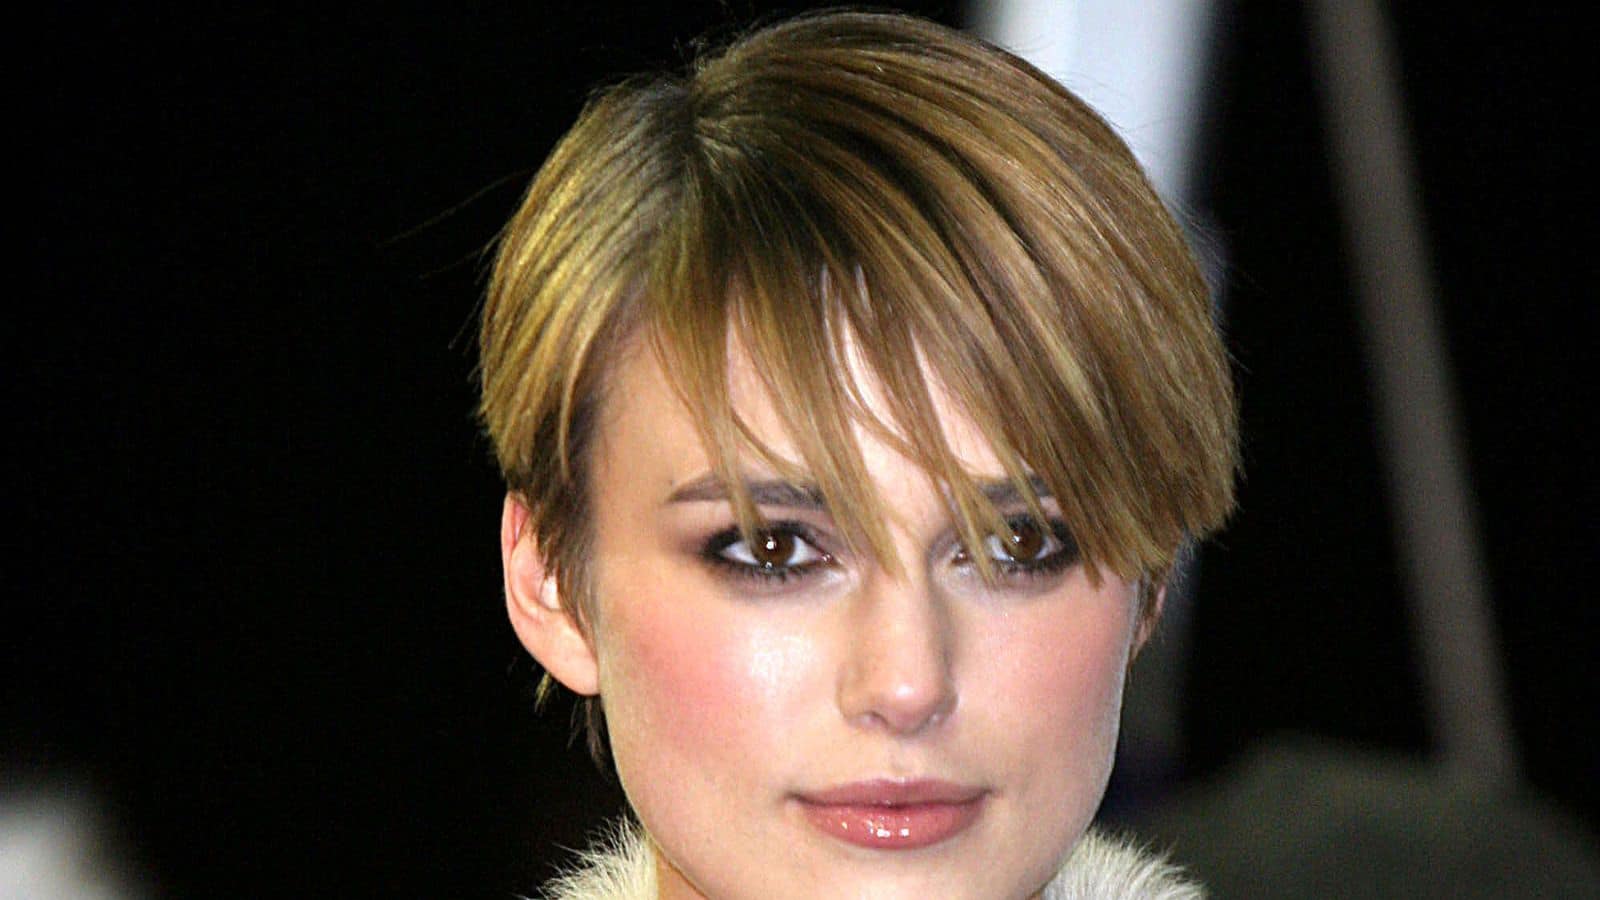 Keira Knightley arrives for the 2005 SUNDANCE FILM FESTIVAL premiere of THE JACKET at the Eccles Center Theatre, January 23 2005 in Park City, Utah wearing a pixie cut haircut